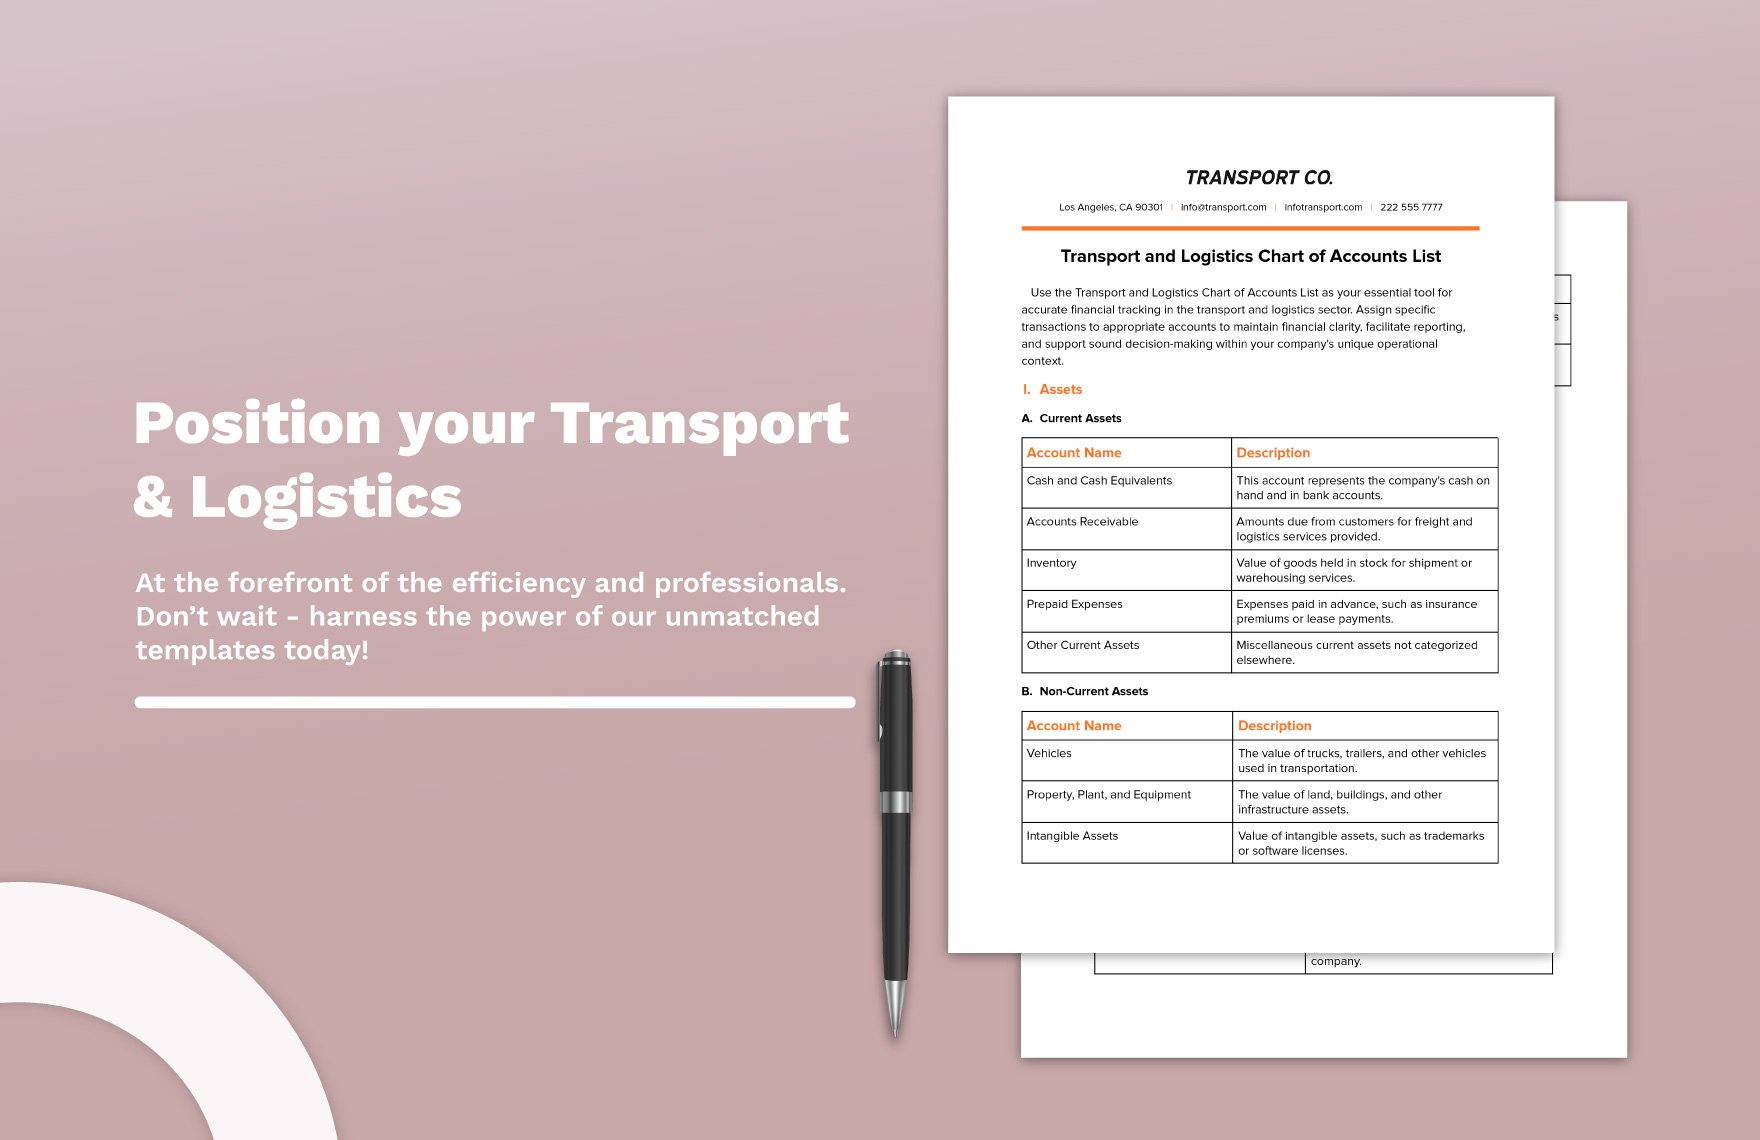 Transport and Logistics Chart of Accounts List Template